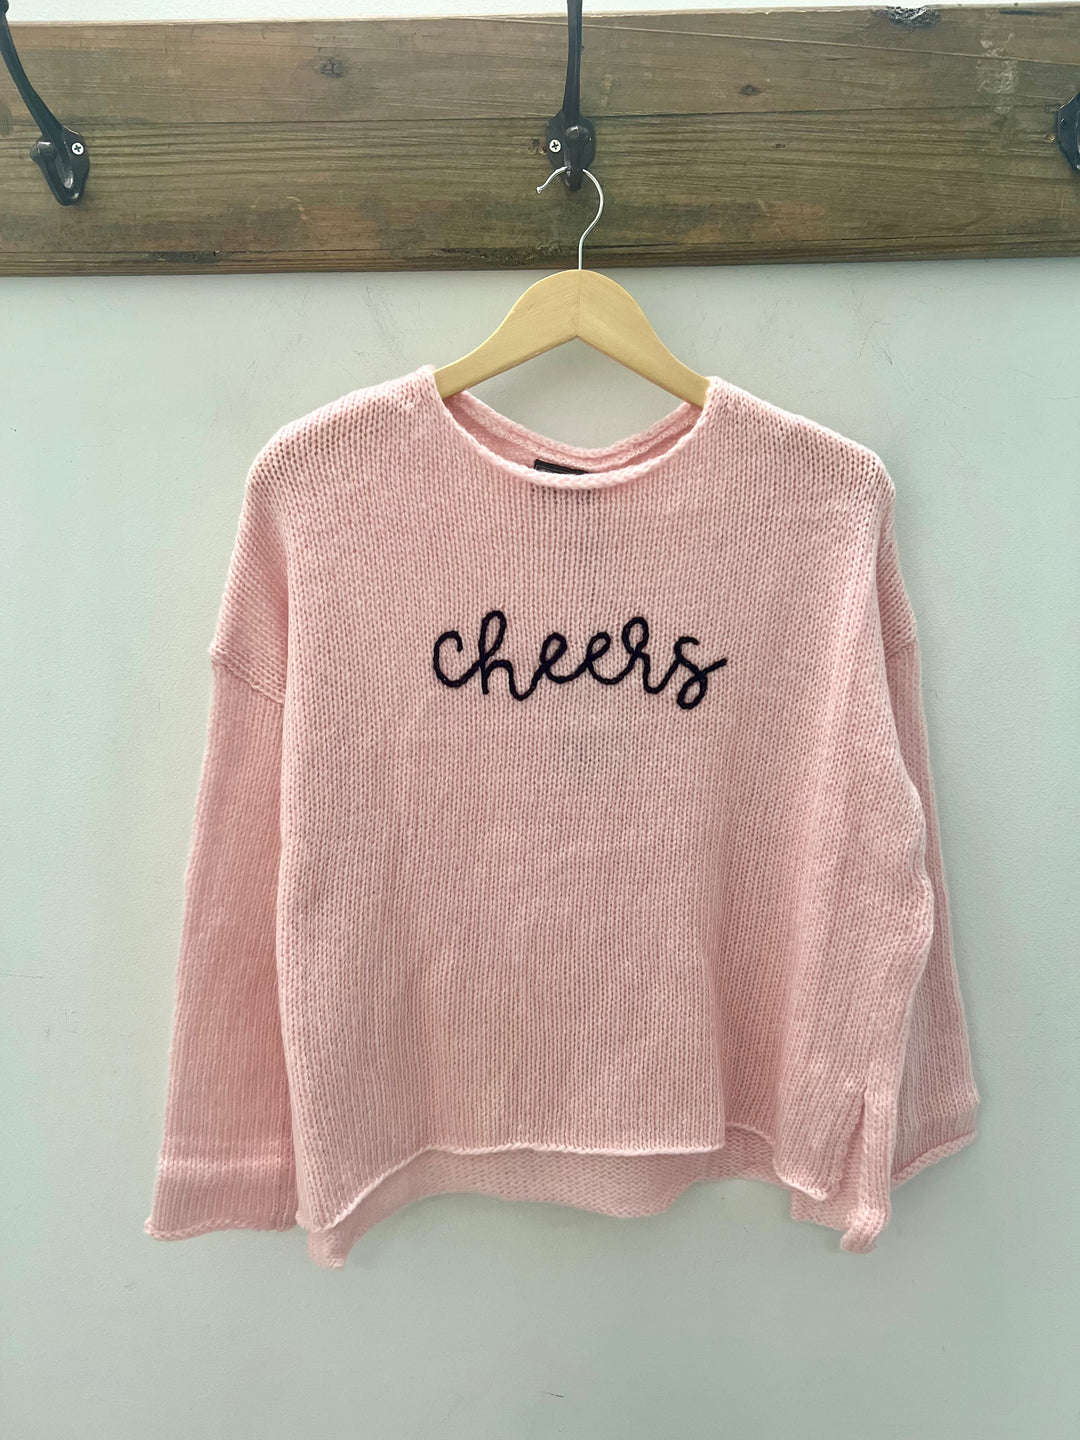 Cheers Embroidered Crew Sweater